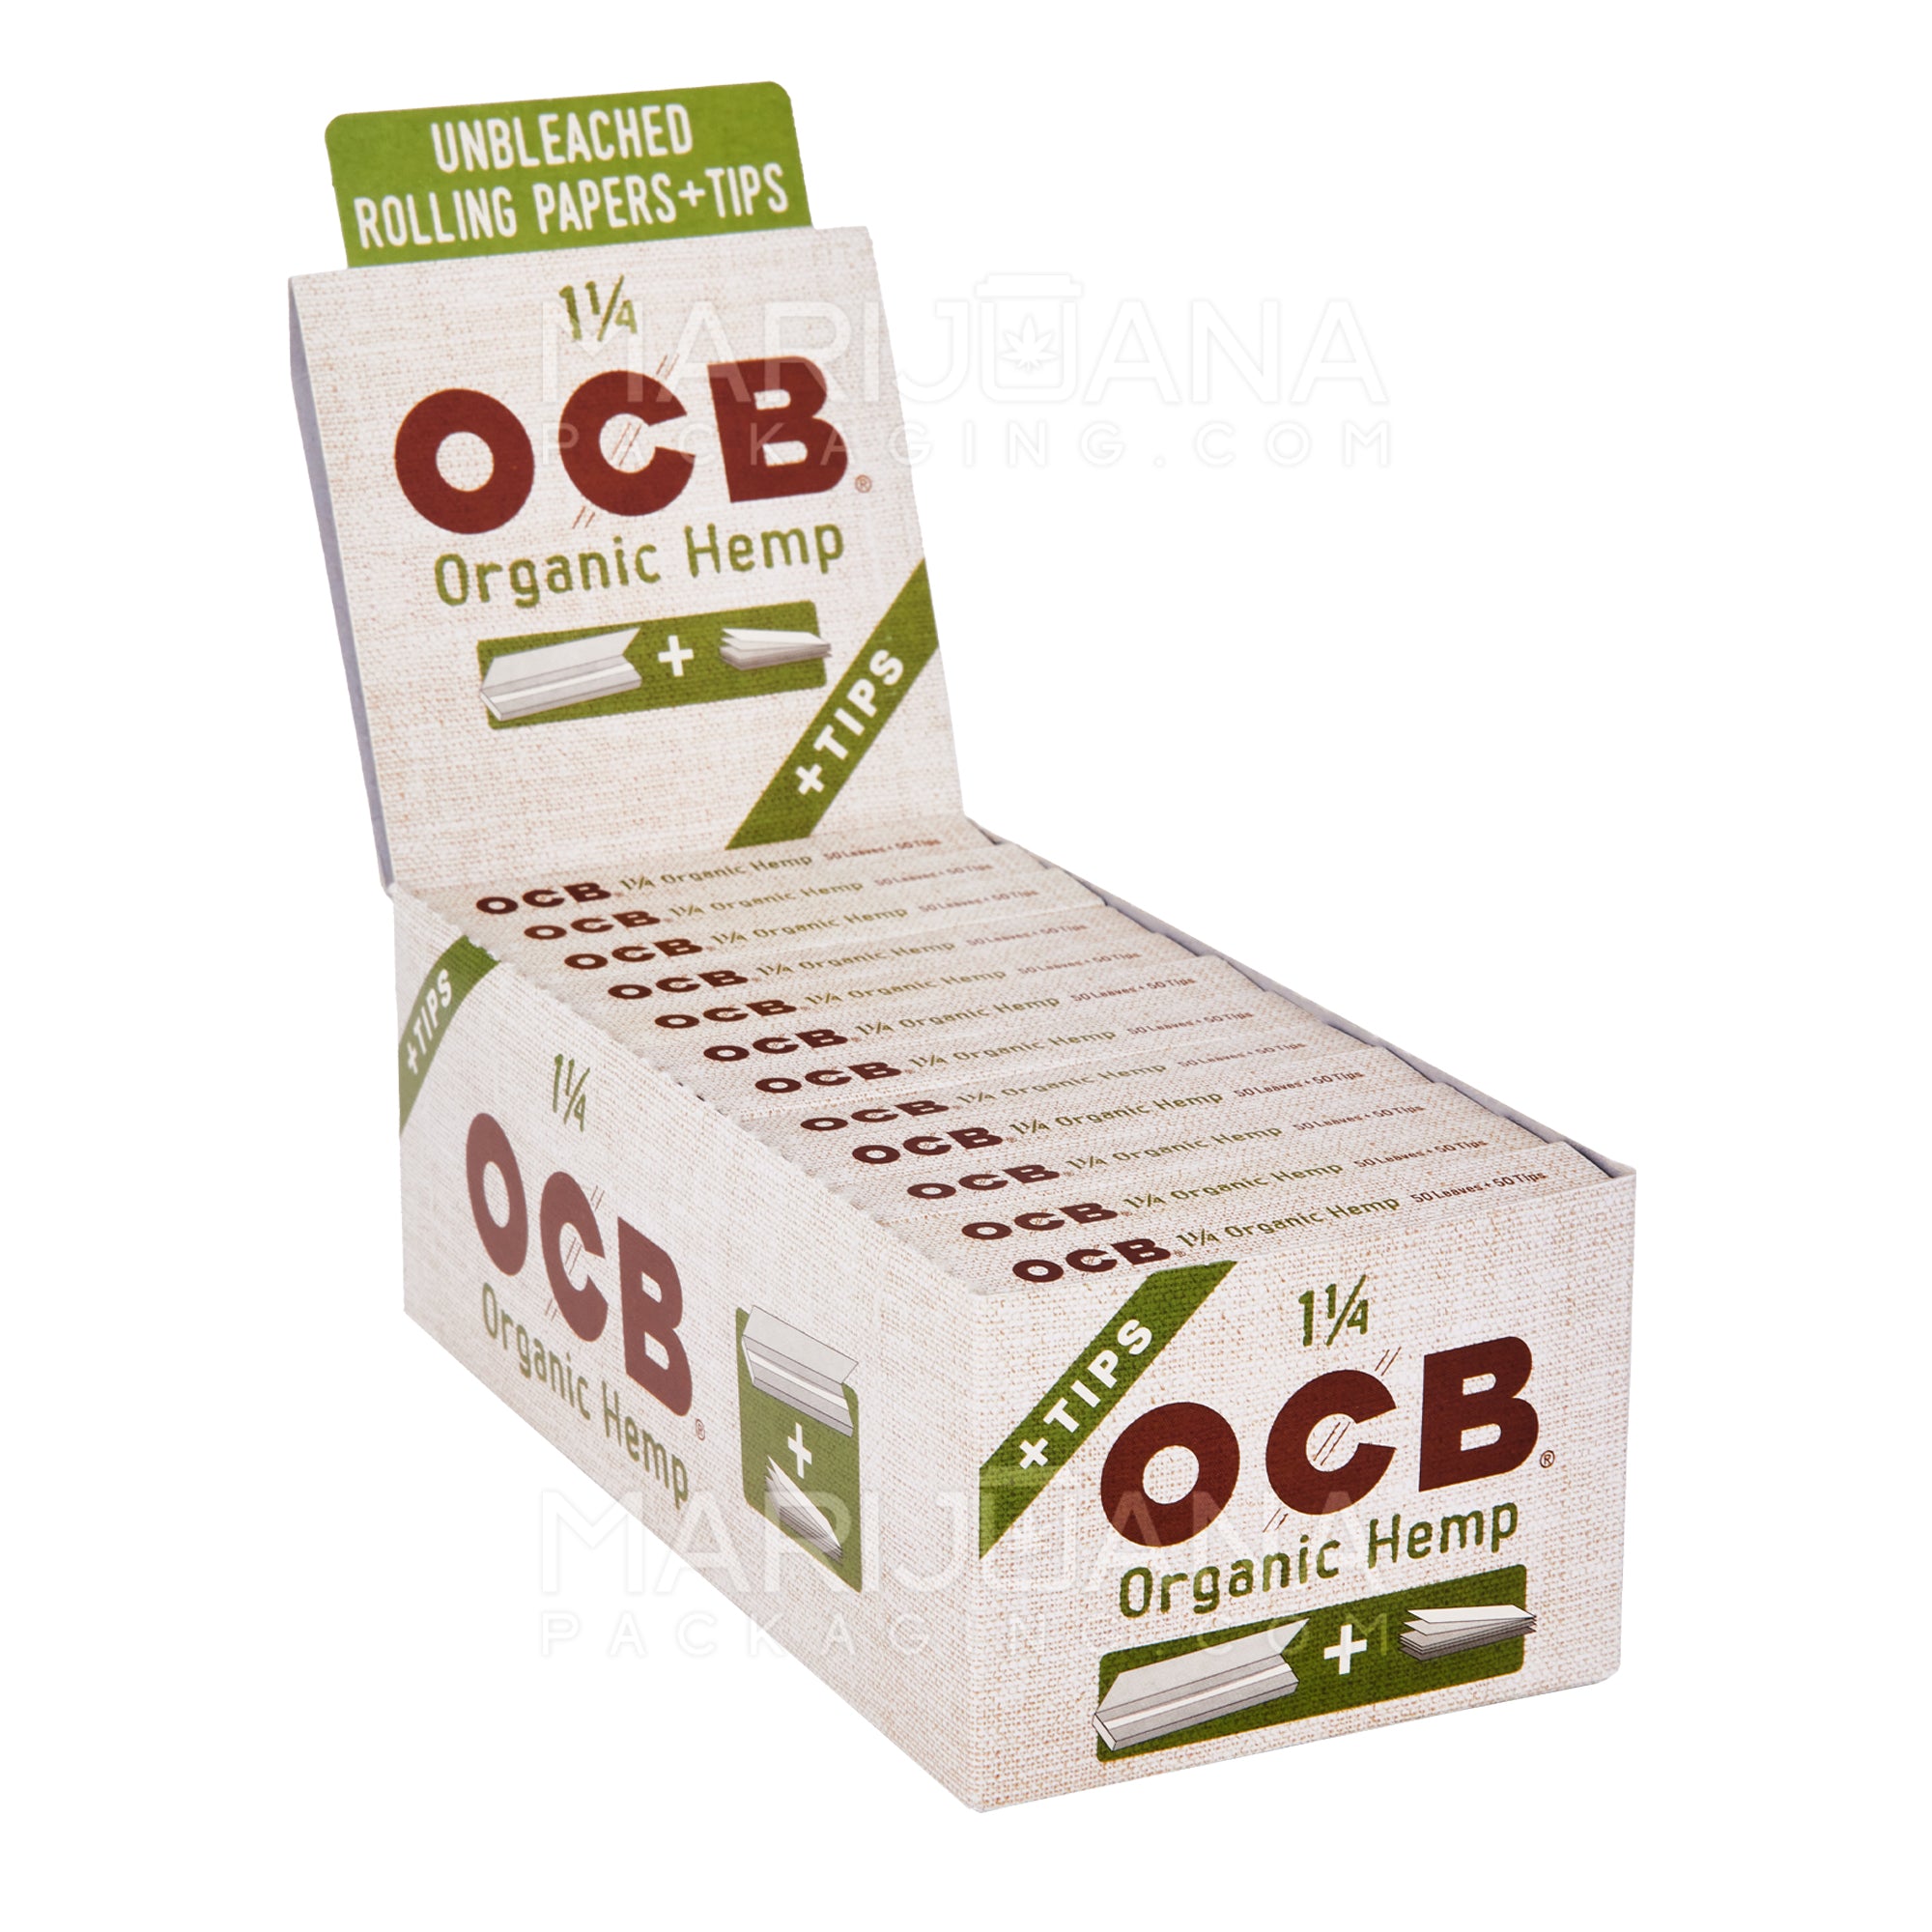 OCB | 'Retail Display' 1 1/4 Size Rolling Papers + Filter Tips | 76mm - Organic Hemp - 24 Count - 1